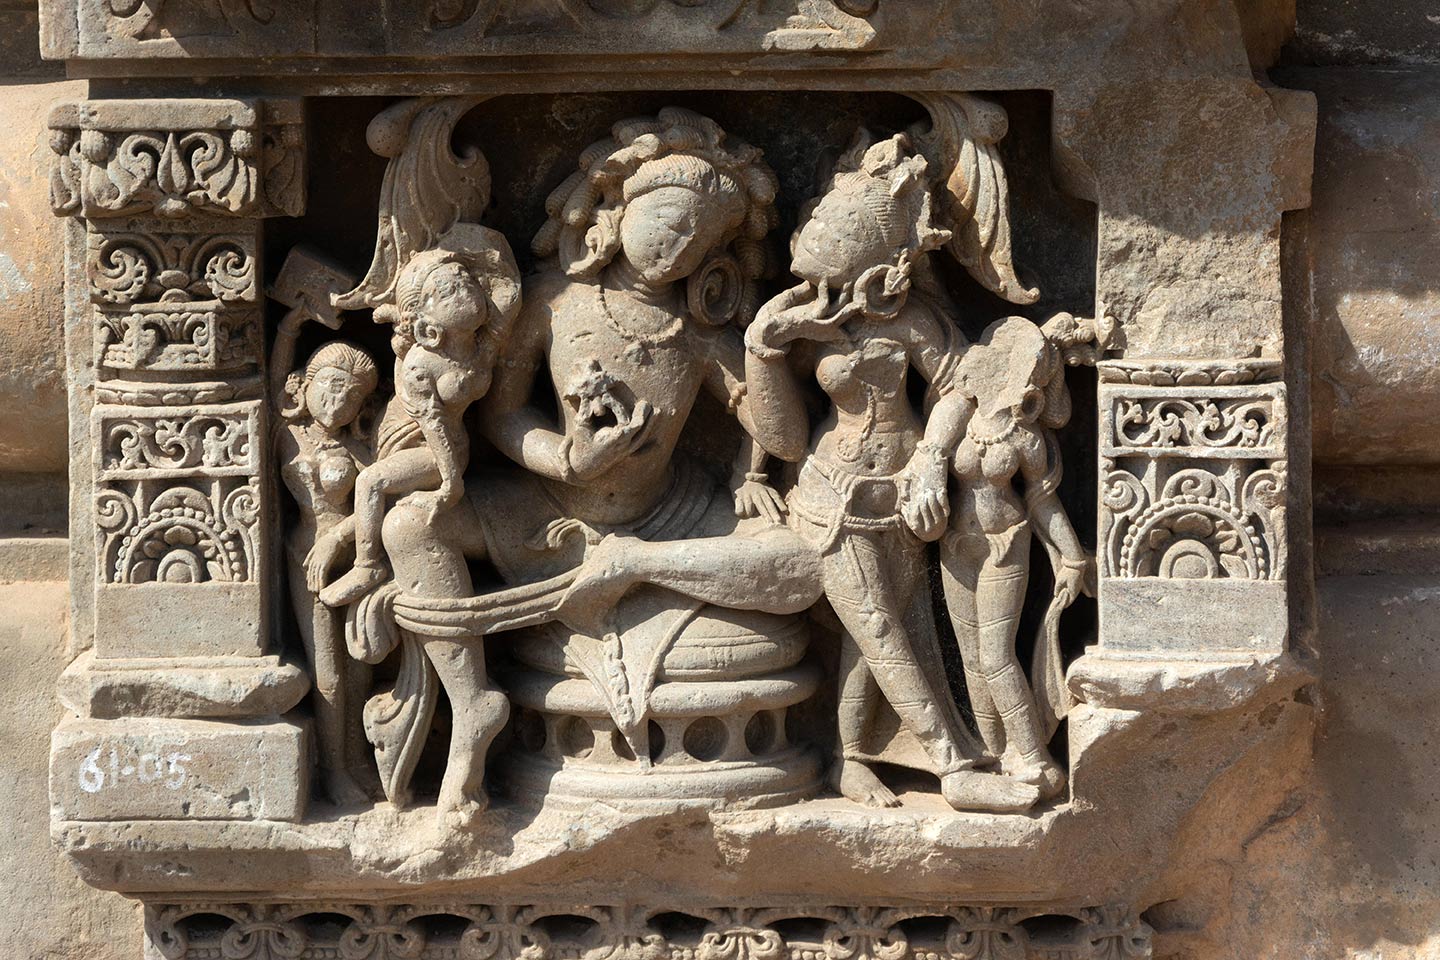 Sculptural panel depicting a couple (likely royal, based on their size and posture) seated on a circular throne and surrounded by female attendants. The scene depicts the couple admiring each other, in a moment of shringar rasa (romantic love).